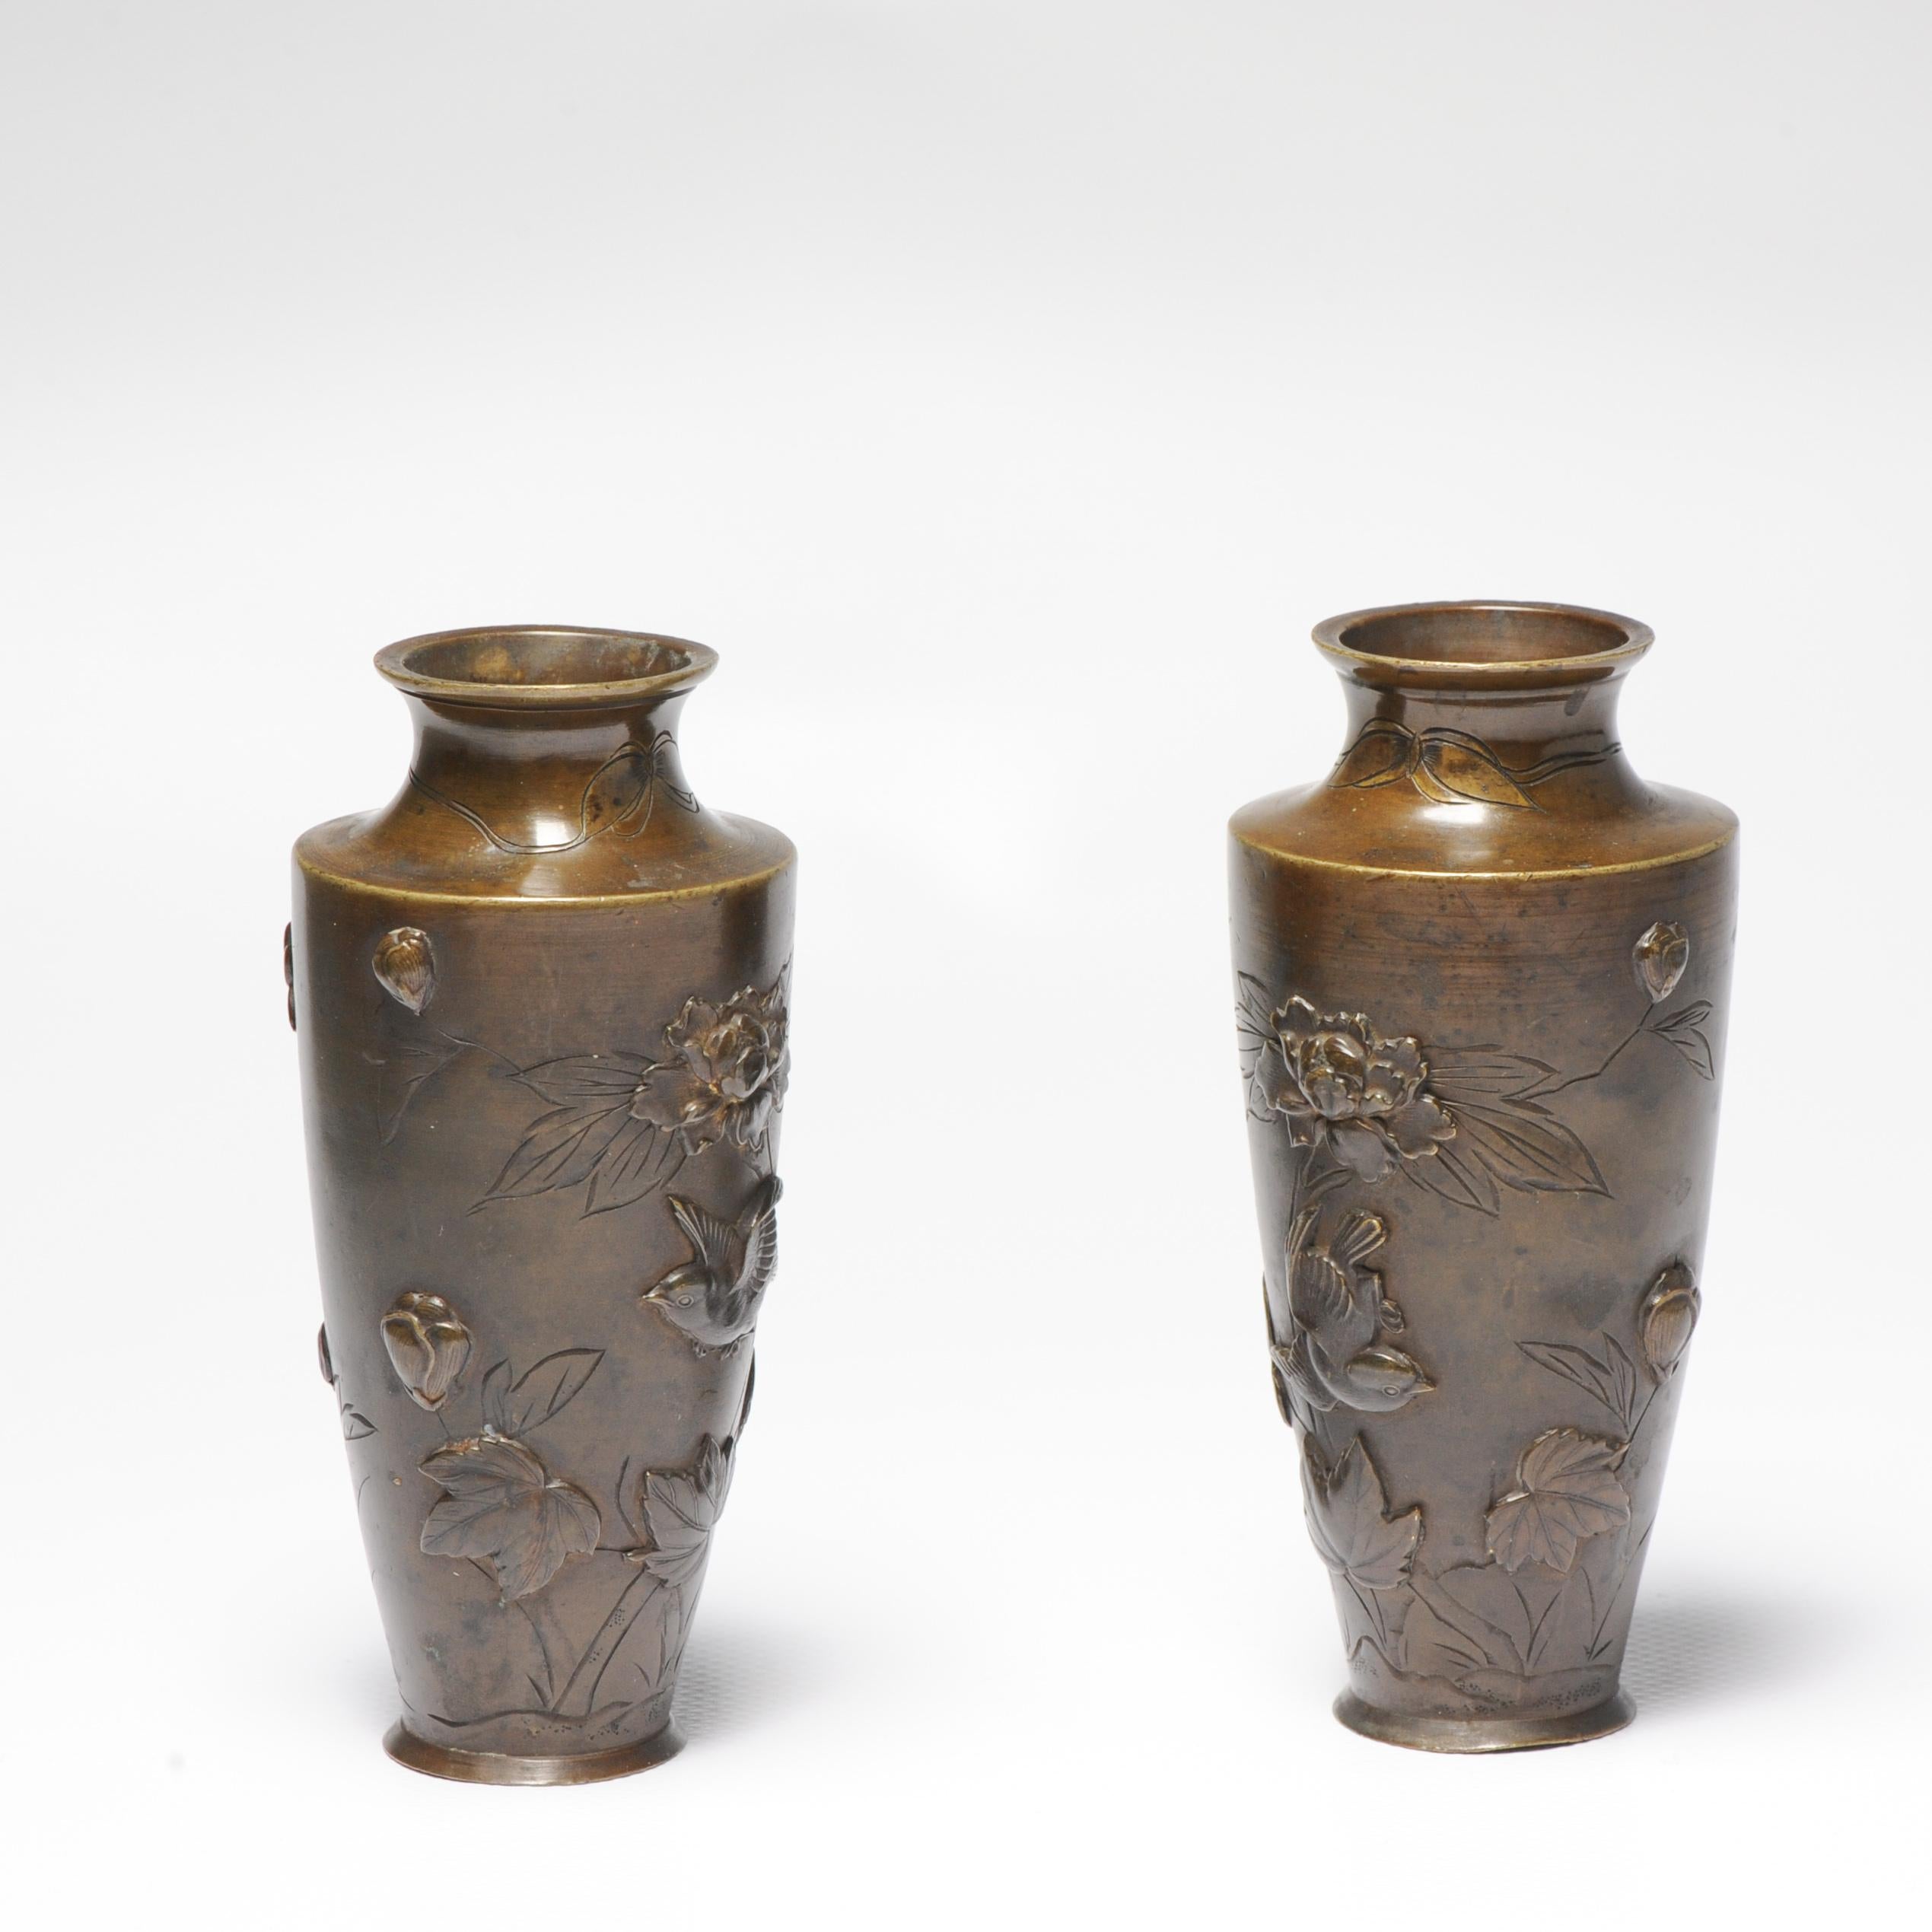 Nicely made vases with a great color shading.

Additional information:
Material: Porcelain & Pottery
Region of Origin: Japan
Period: 19th century Edo Period (1603–1867), Meiji Periode (1867-1912)
Condition: Some ware and some small dents